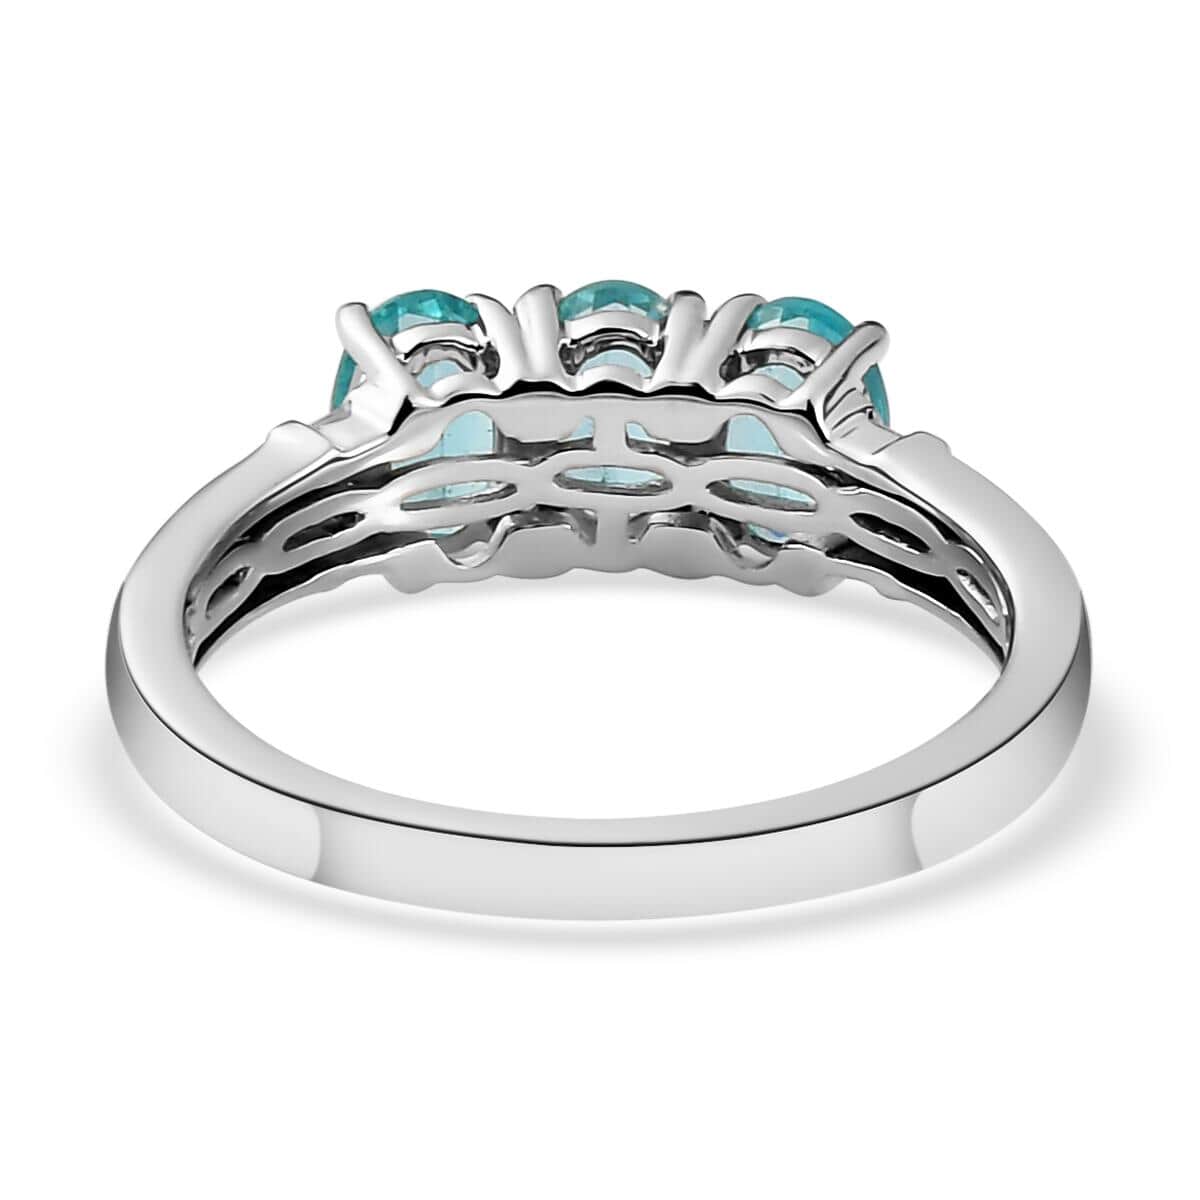 LUXORO 10K White Gold Premium Madagascar Paraiba Apatite, Diamond Trilogy Ring (Size 10.0) (2.50 g) (Delivery in 12-15 Business Days) 1.50 ctw image number 4